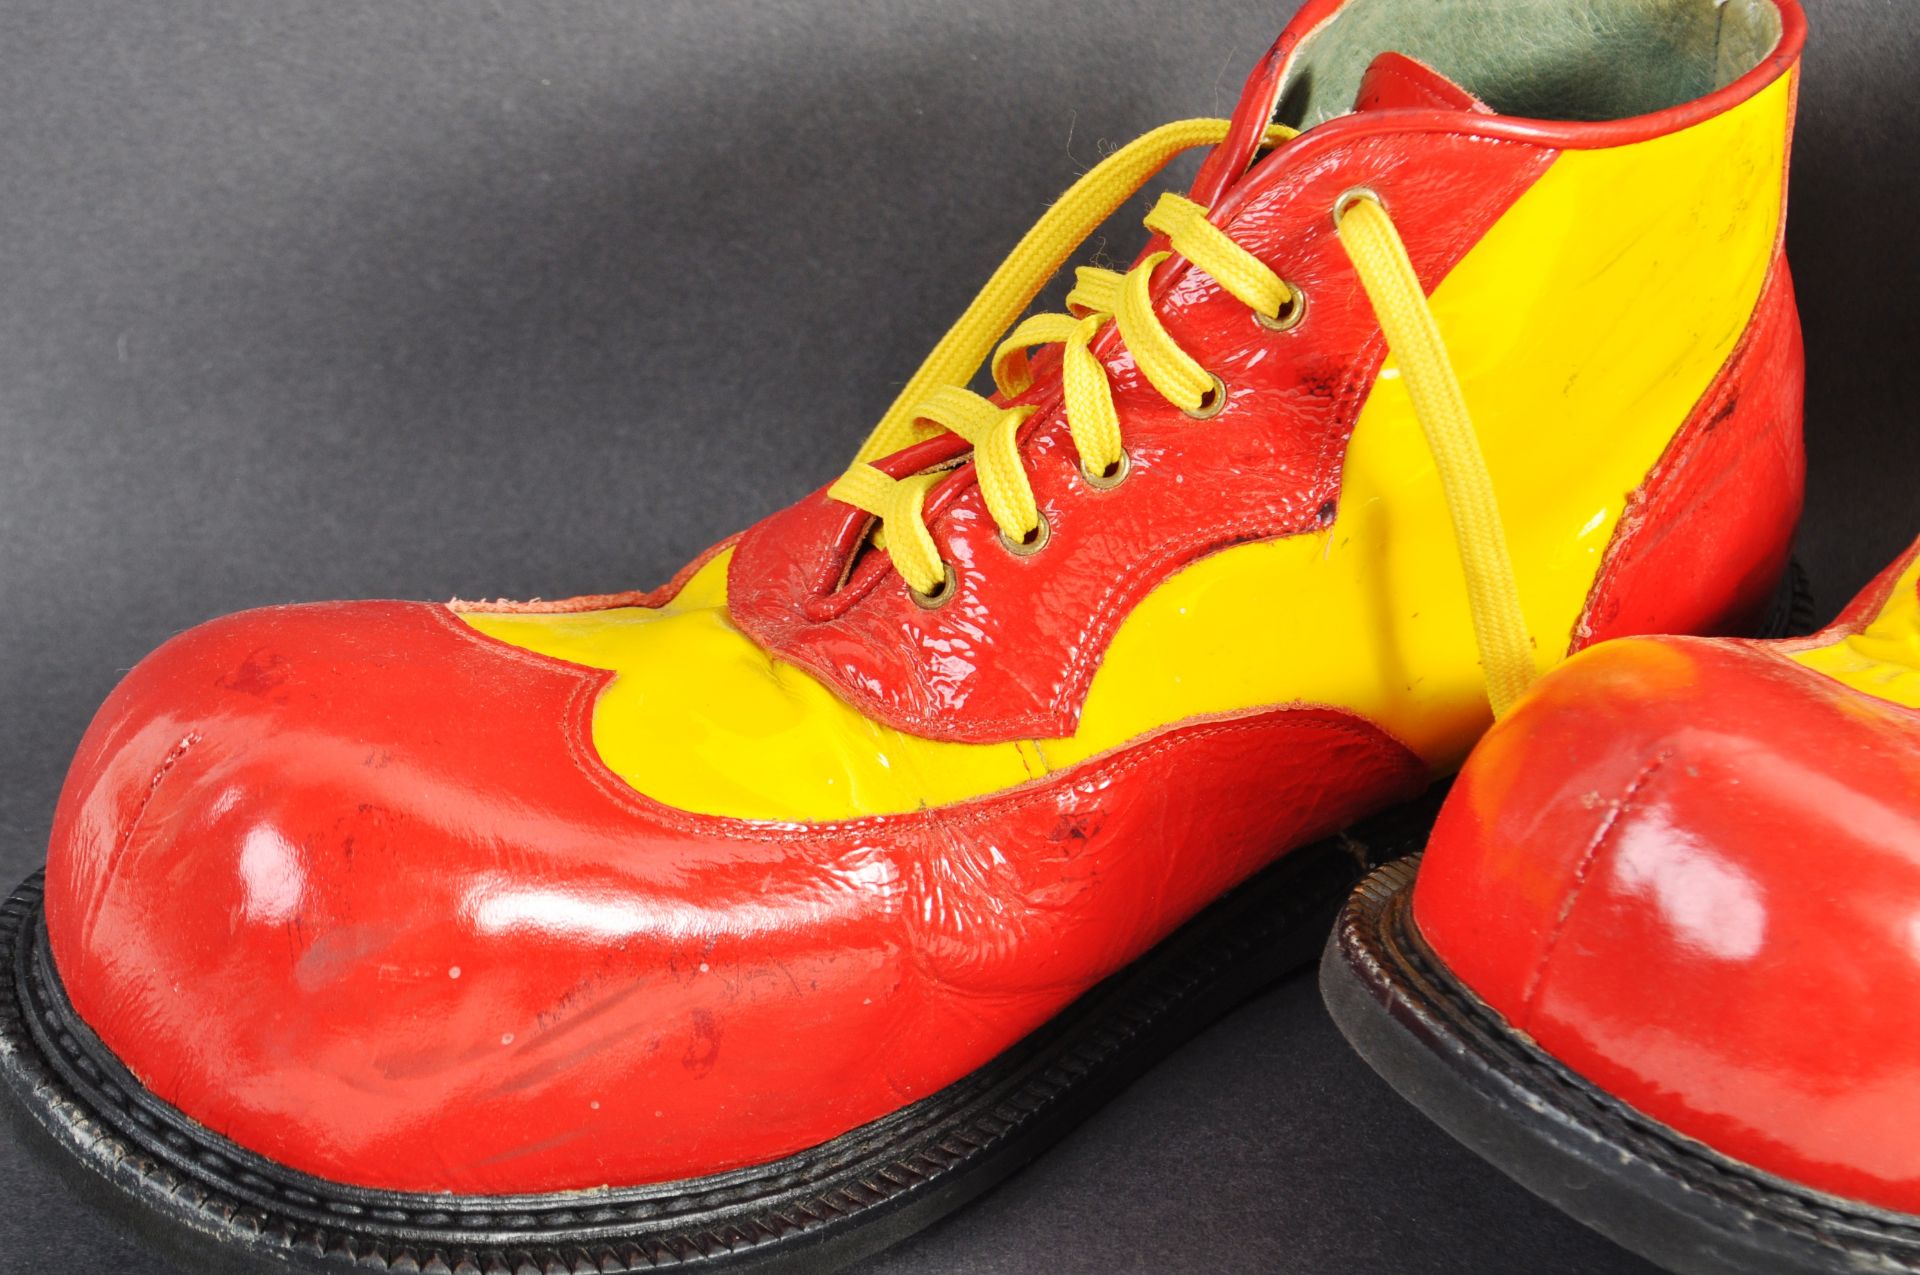 PAIR OF VINTAGE RED & YELLOW CLOWN SHOES - Image 2 of 5